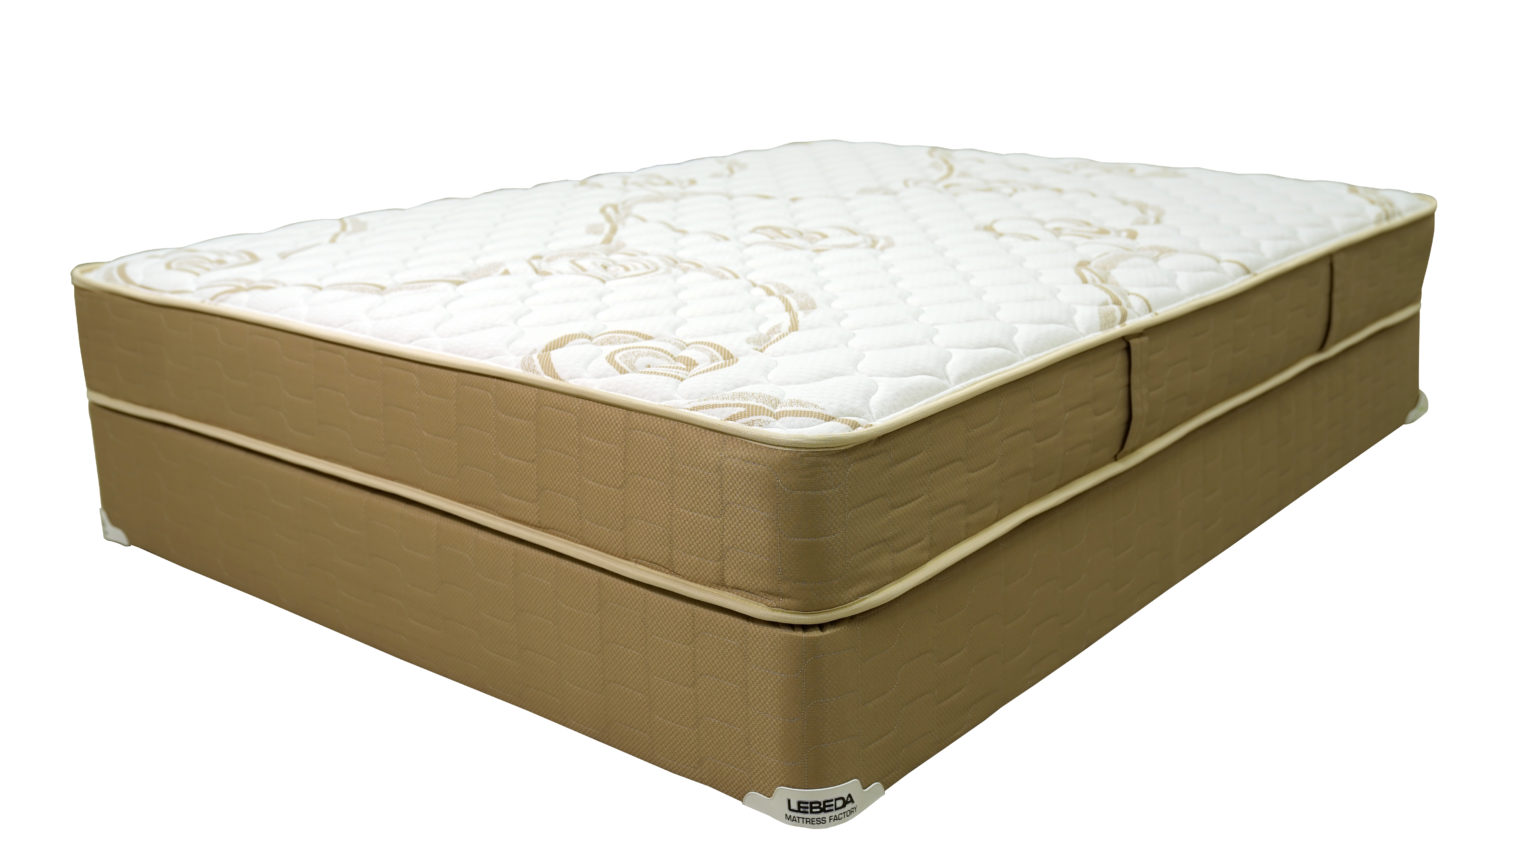 lebeda mattress store daybed